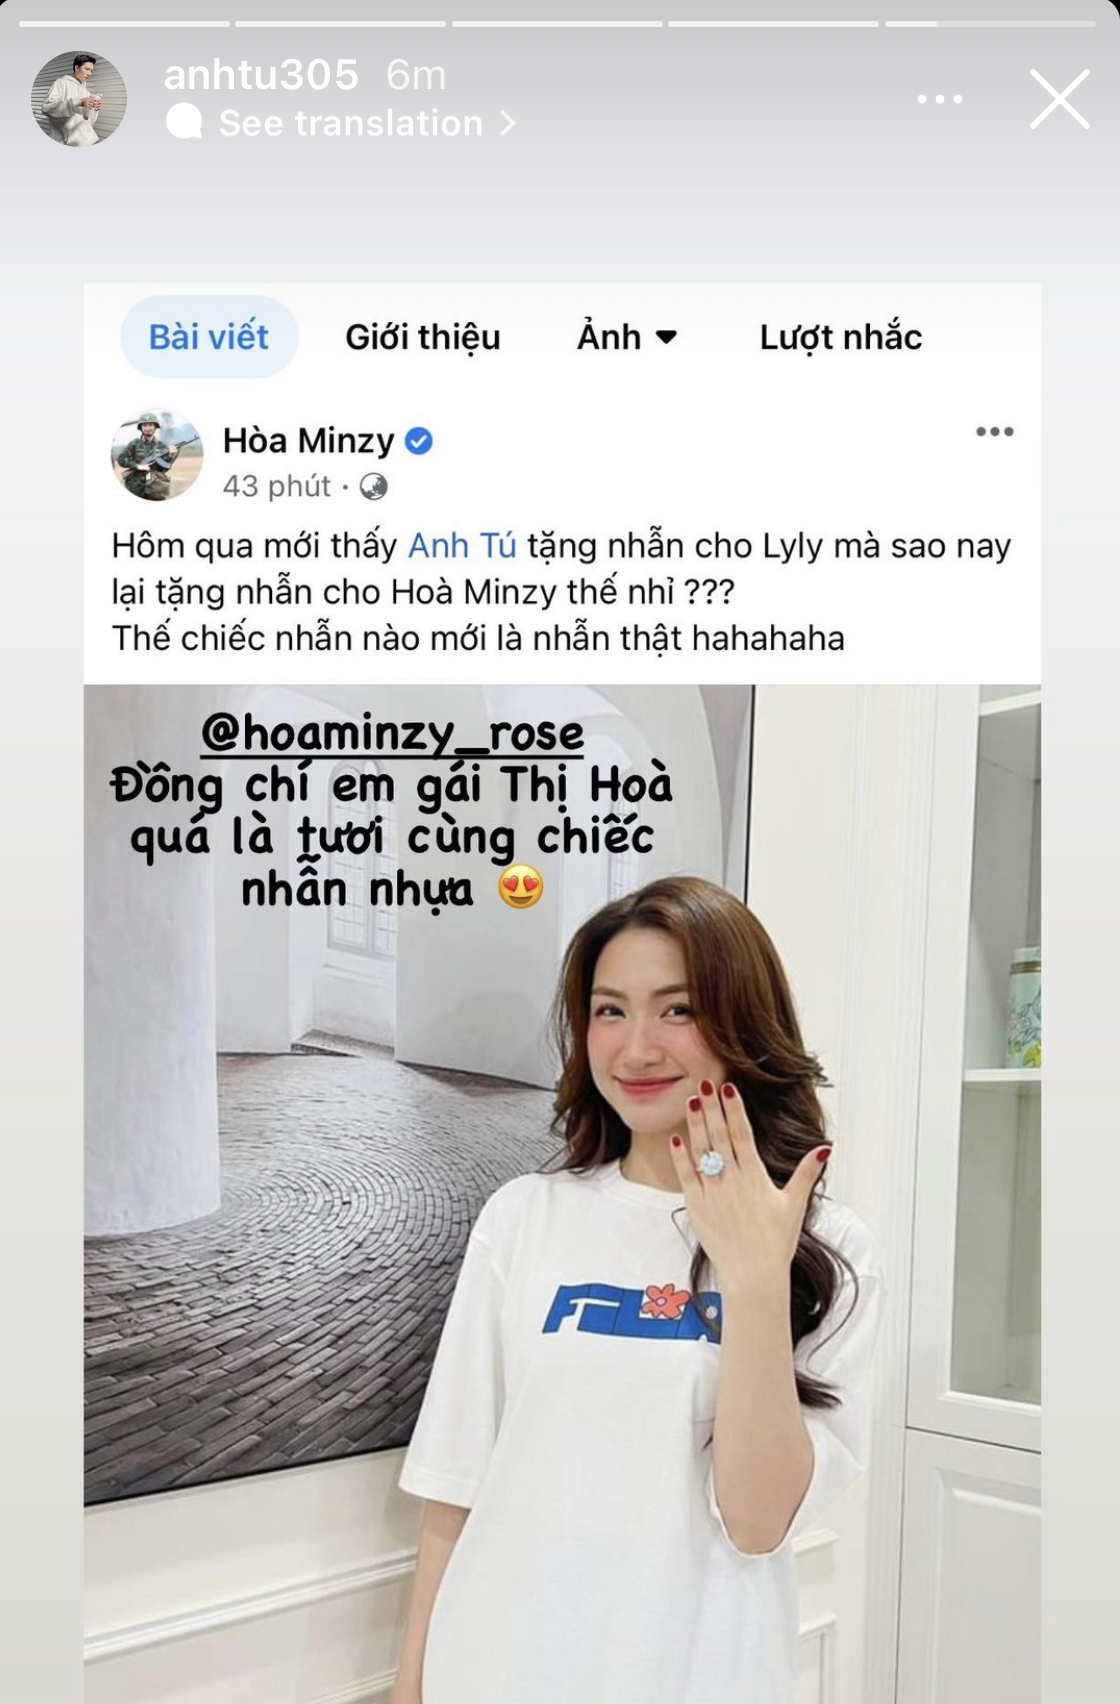 Thanks to the cast of Stars, netizens gradually guessed the truth after a series of photos of Anh Tu proposing to LyLy - Photo 7.